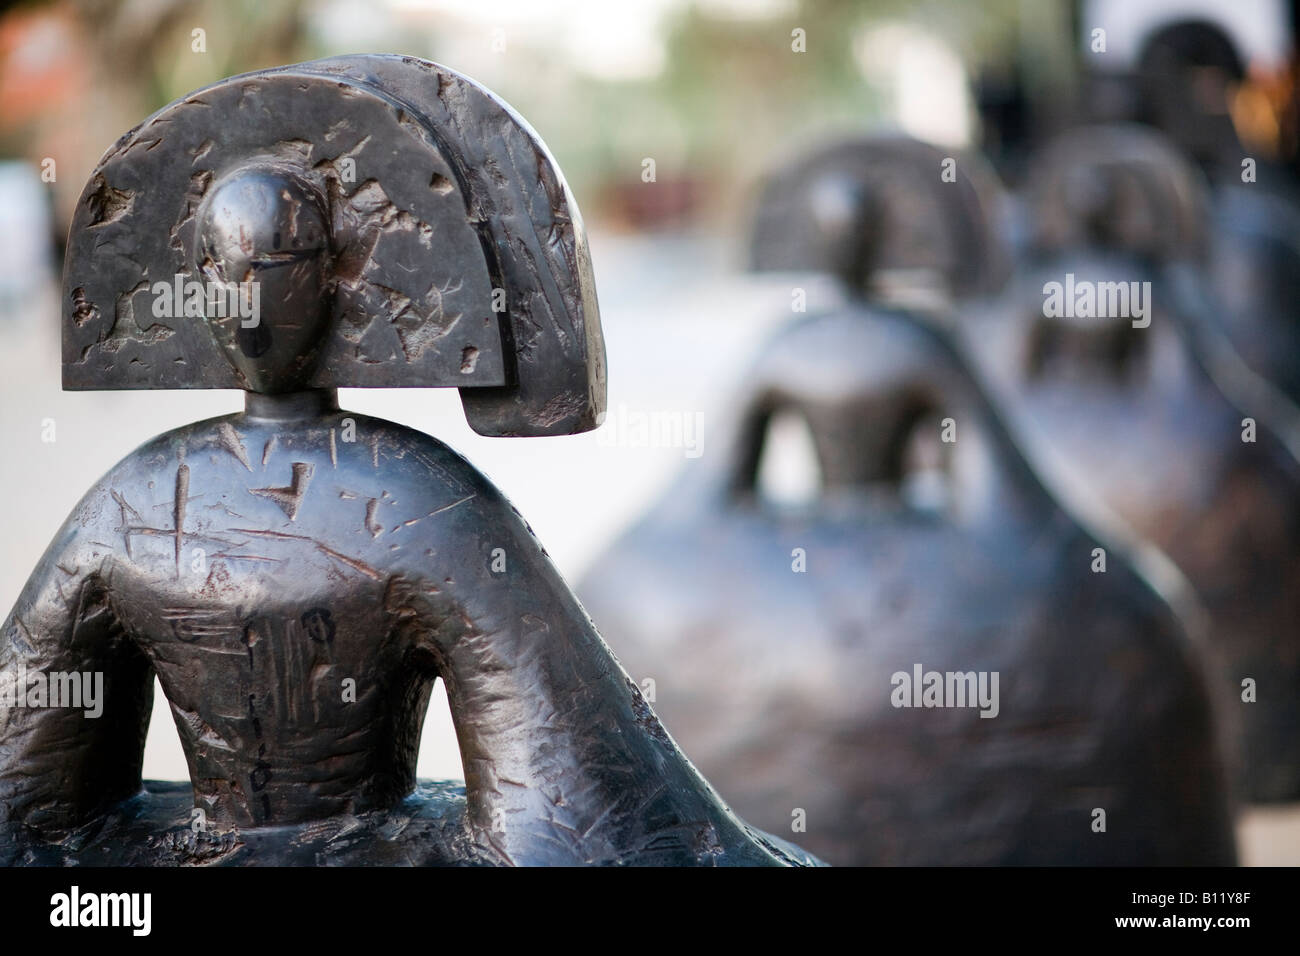 Bronze statues by the Spanish artist Manolo Valdes exhibited on the street, Seville, Spain Stock Photo